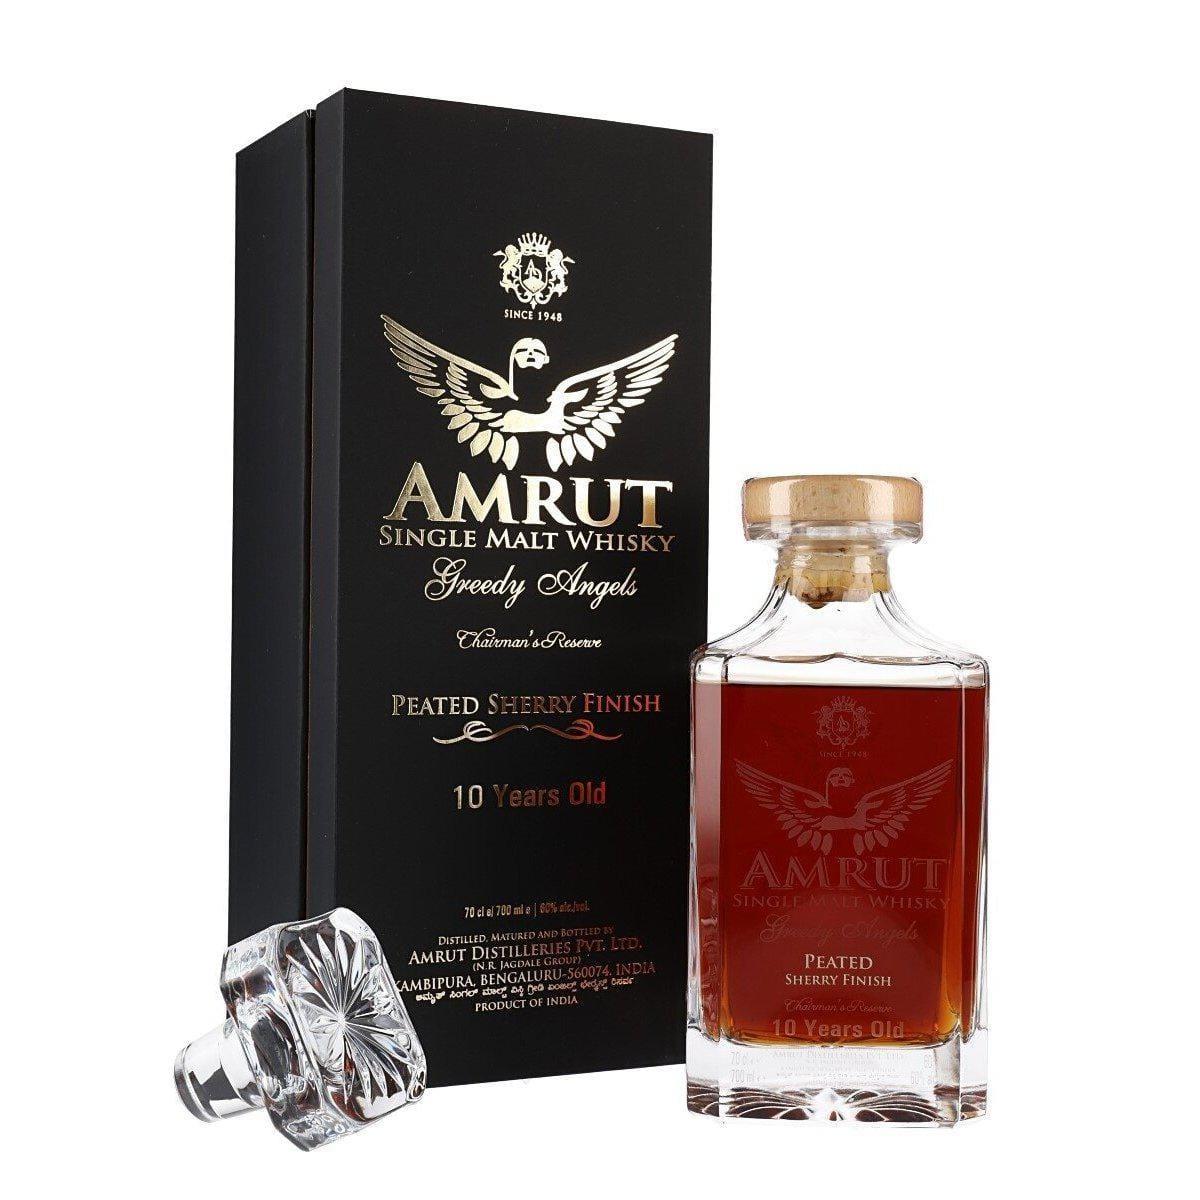 Amrut Greedy Angels Chairmans Reserve Peated Sherry Finish 10 Year Old Cask Strength Single Malt Indian Whisky 700ml - Booze House